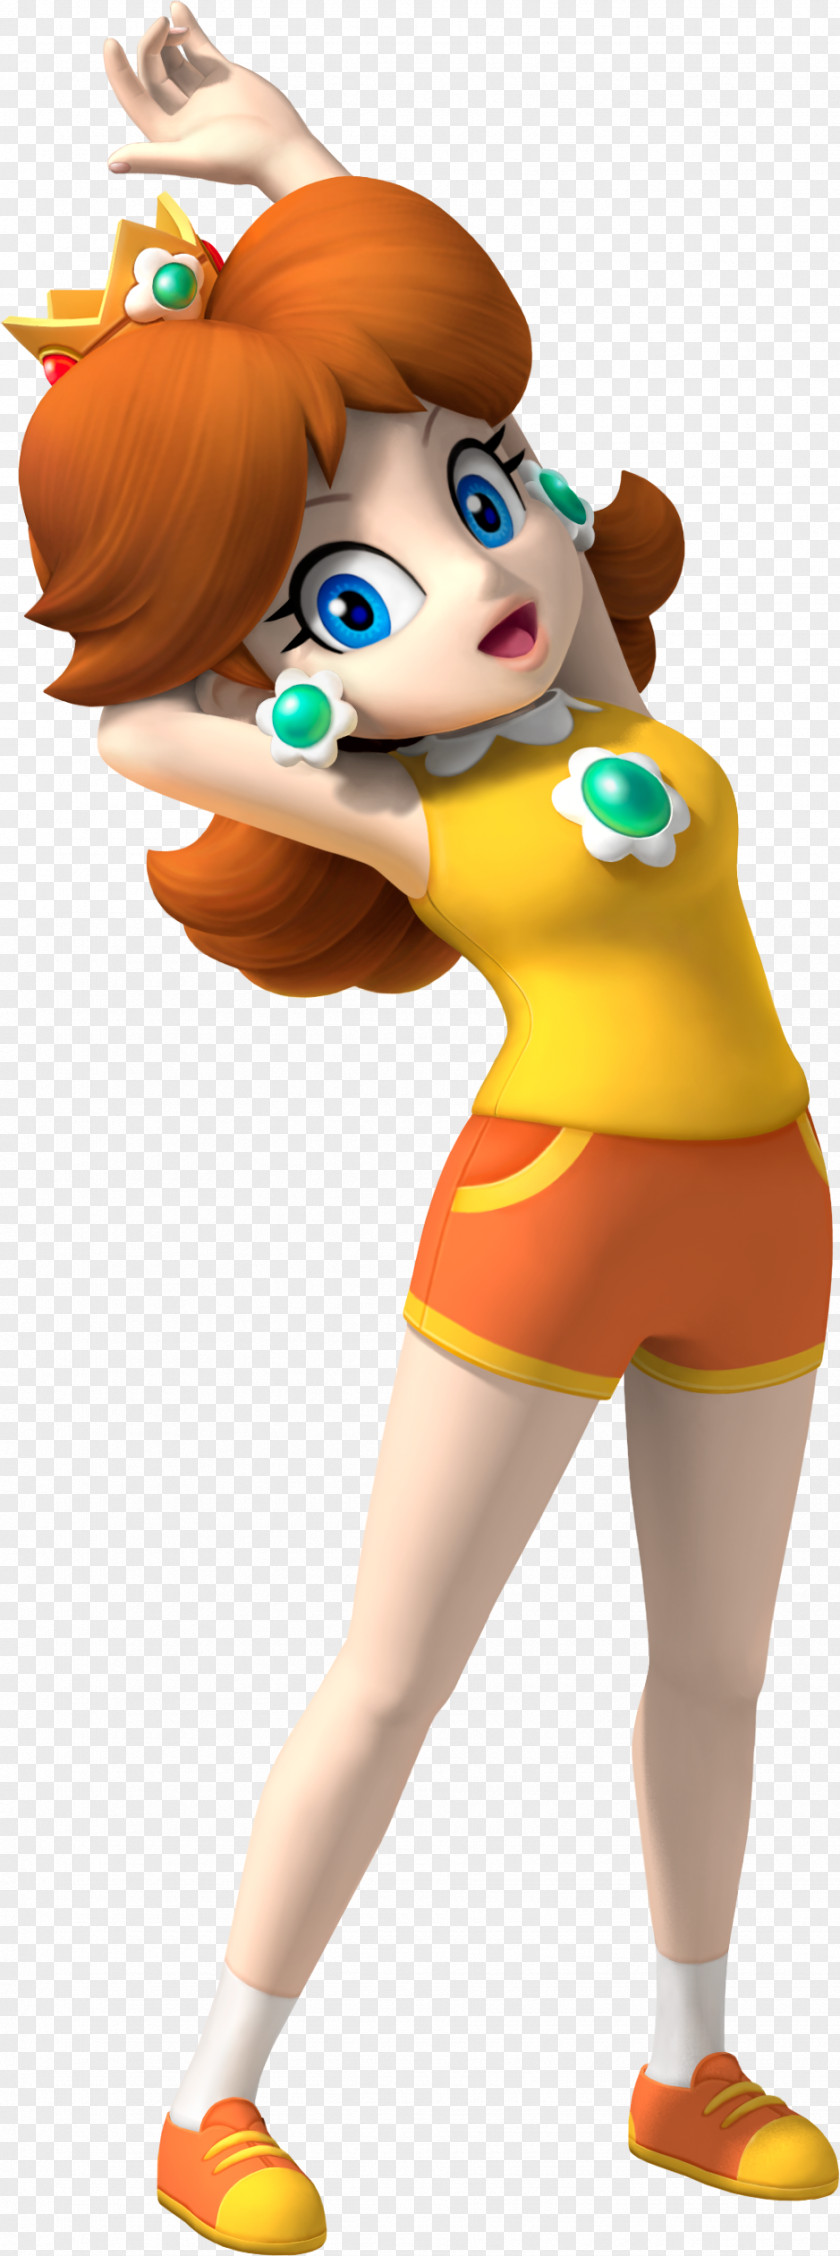 Peach Princess Daisy Mario & Sonic At The Olympic Games Super Land PNG